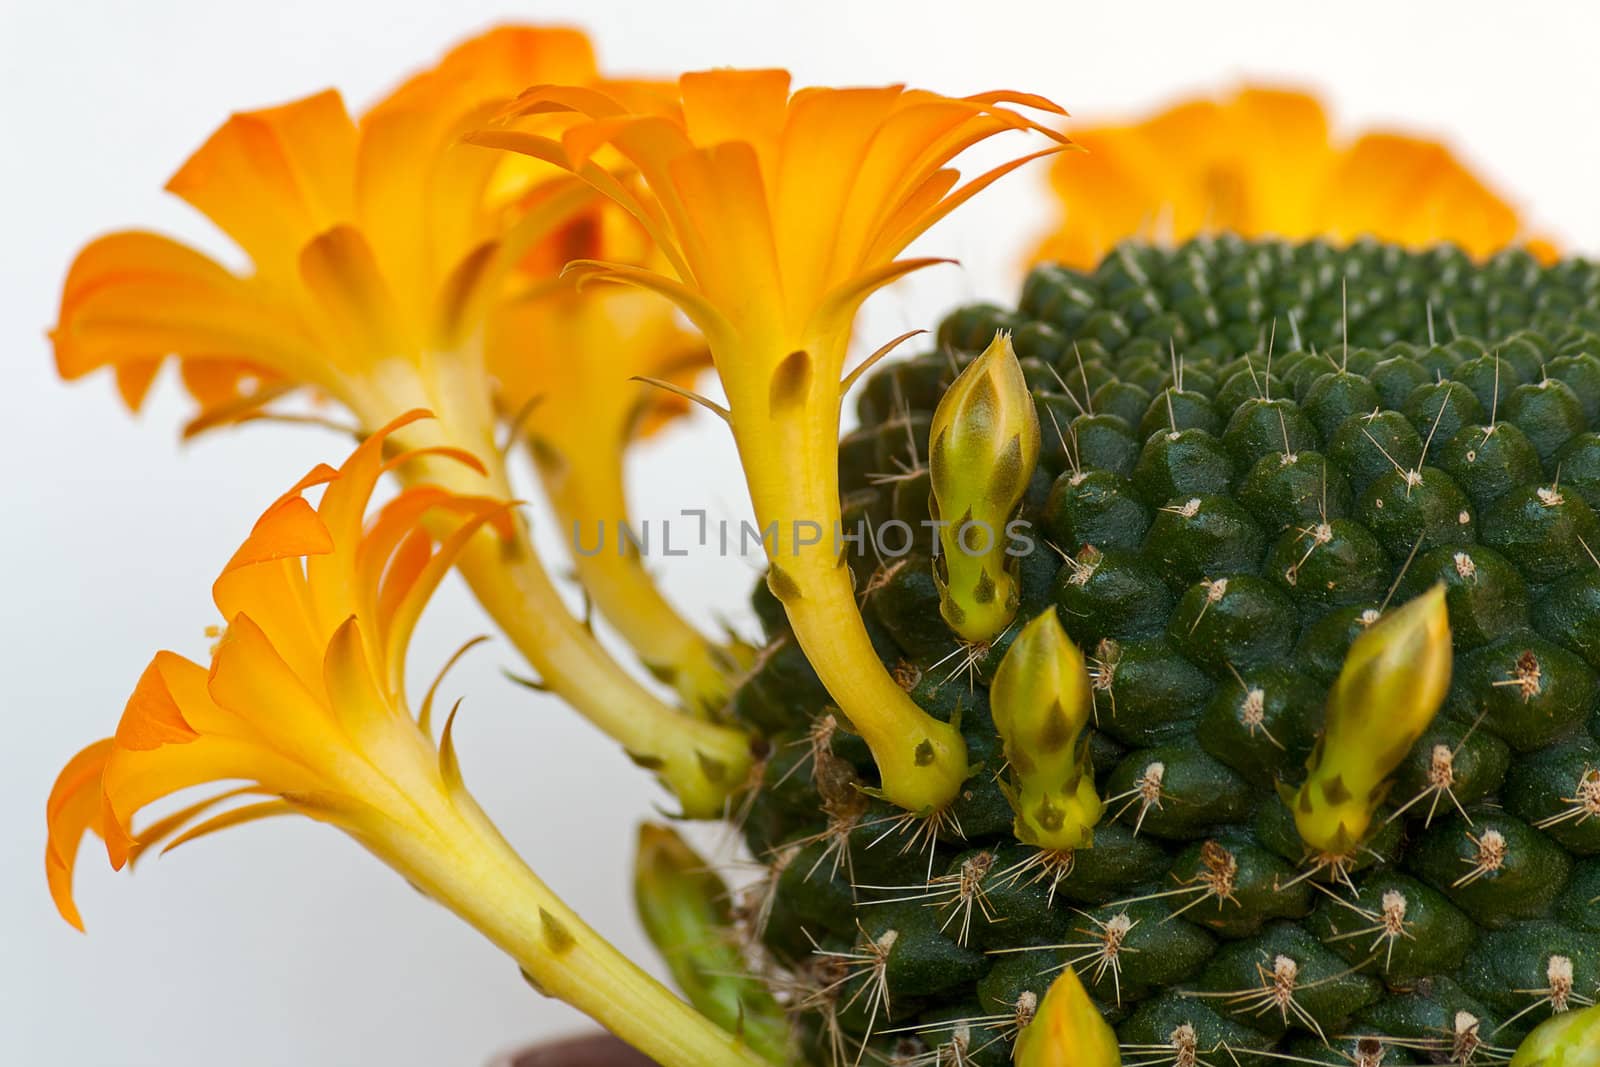 Cactus with flowers  on light  background (Rebutia).Image with shallow depth of field.